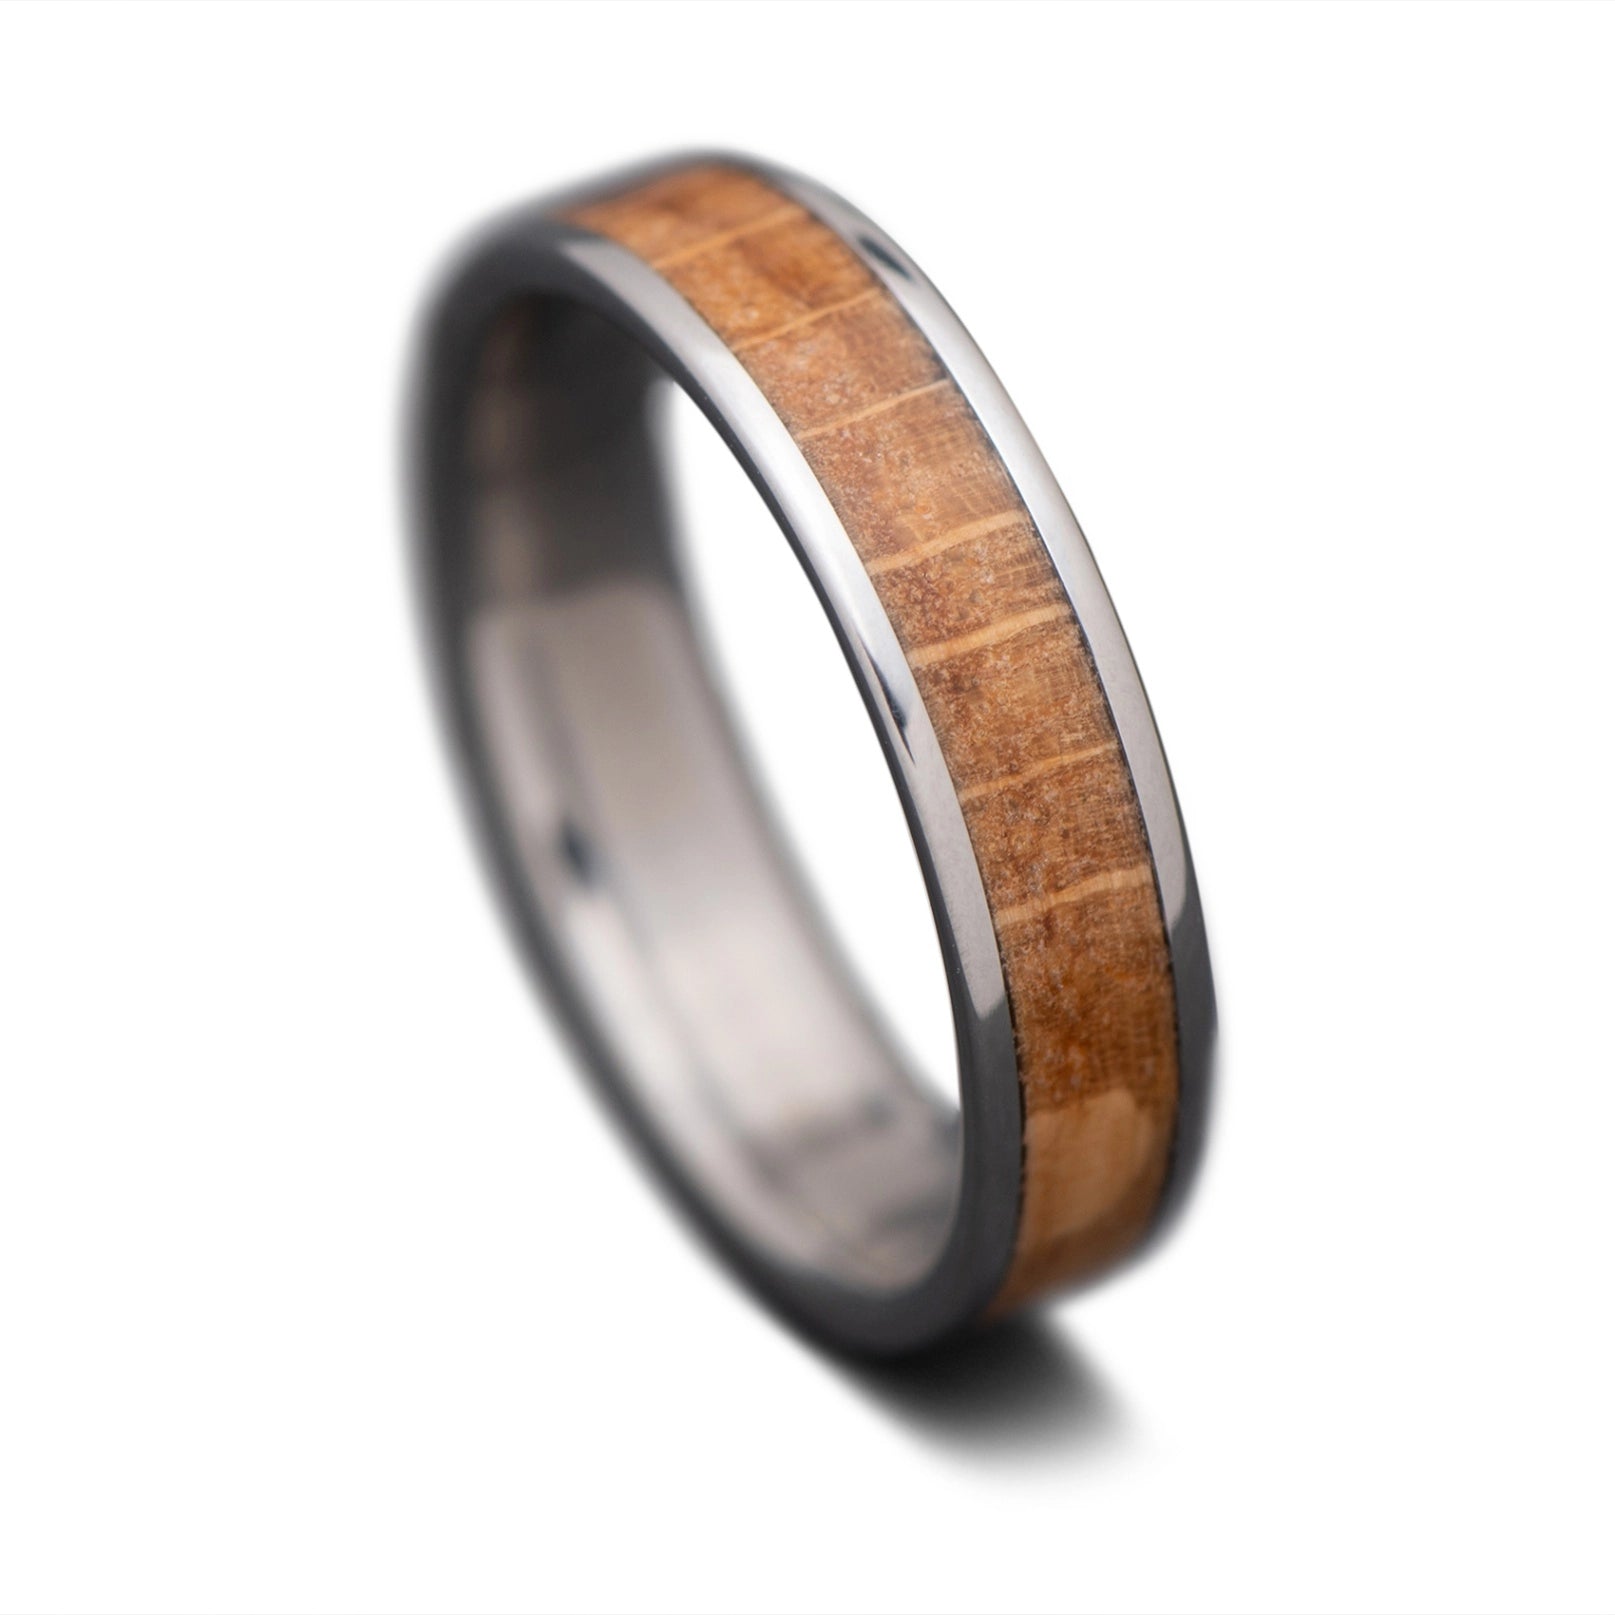  Titanium core ring with  Whiskey Barrel Oak inlay, 5mm -THE CORE